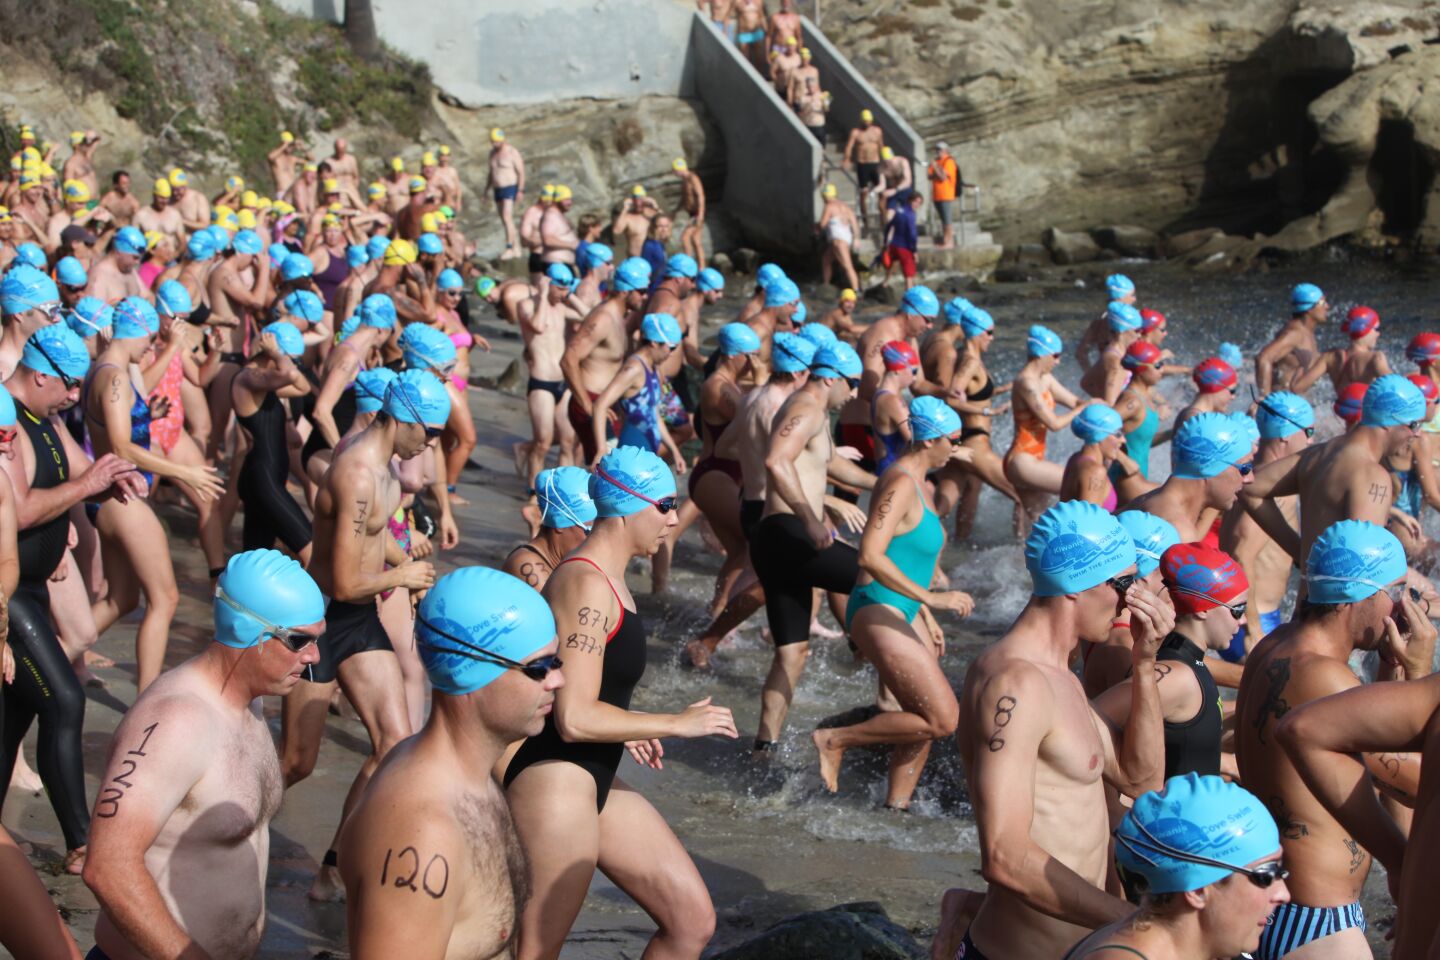 Hundreds of swimmers take to the water Sept. 11 from La Jolla Cove beach.